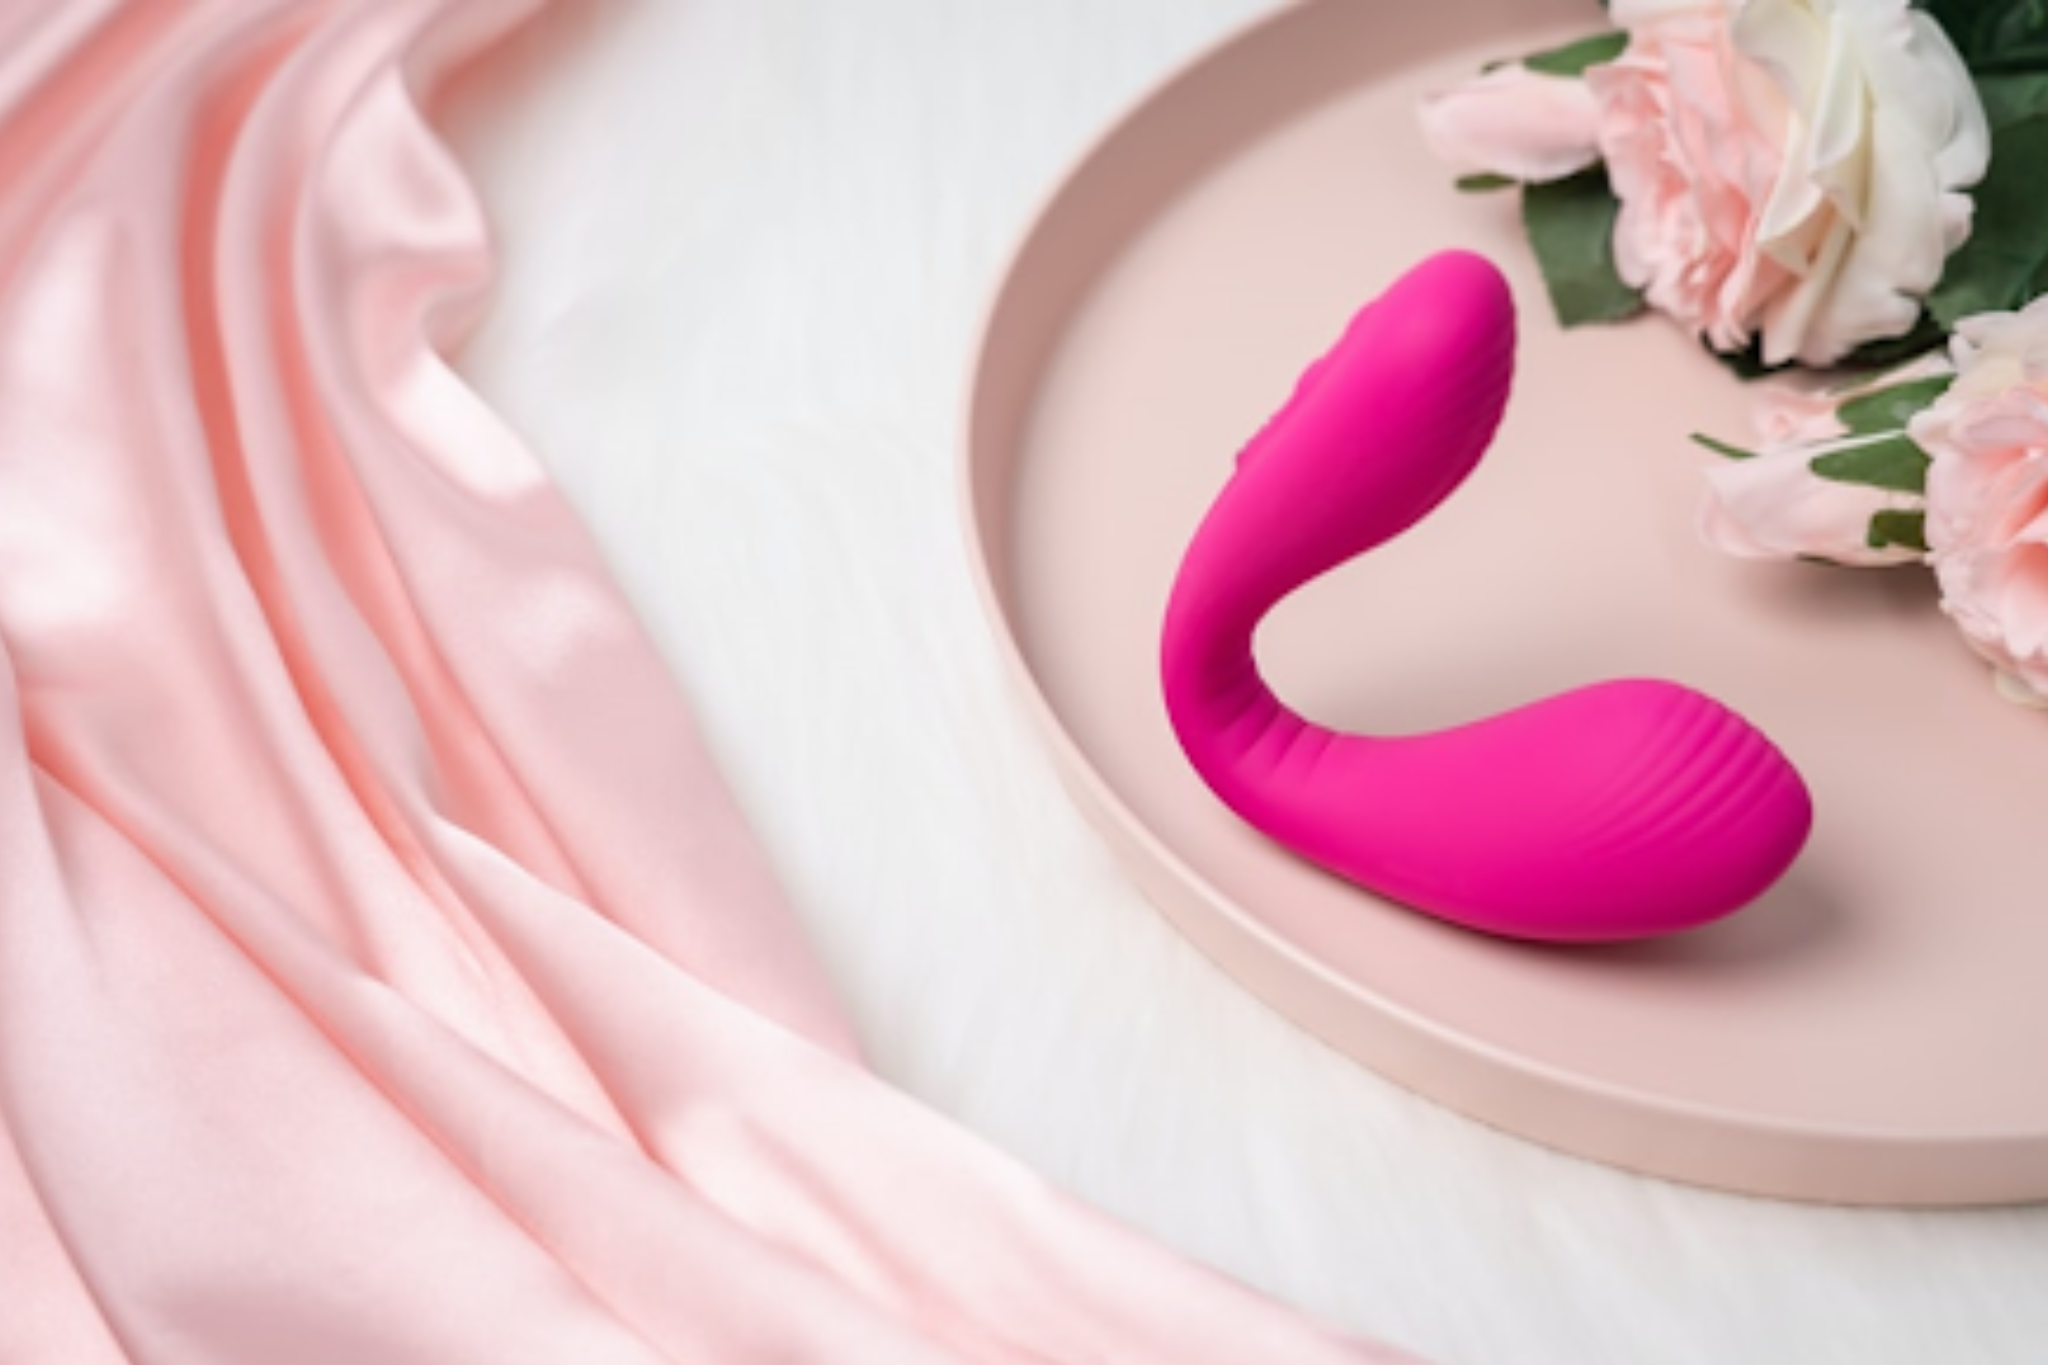 The Best Materials for Sex Toys